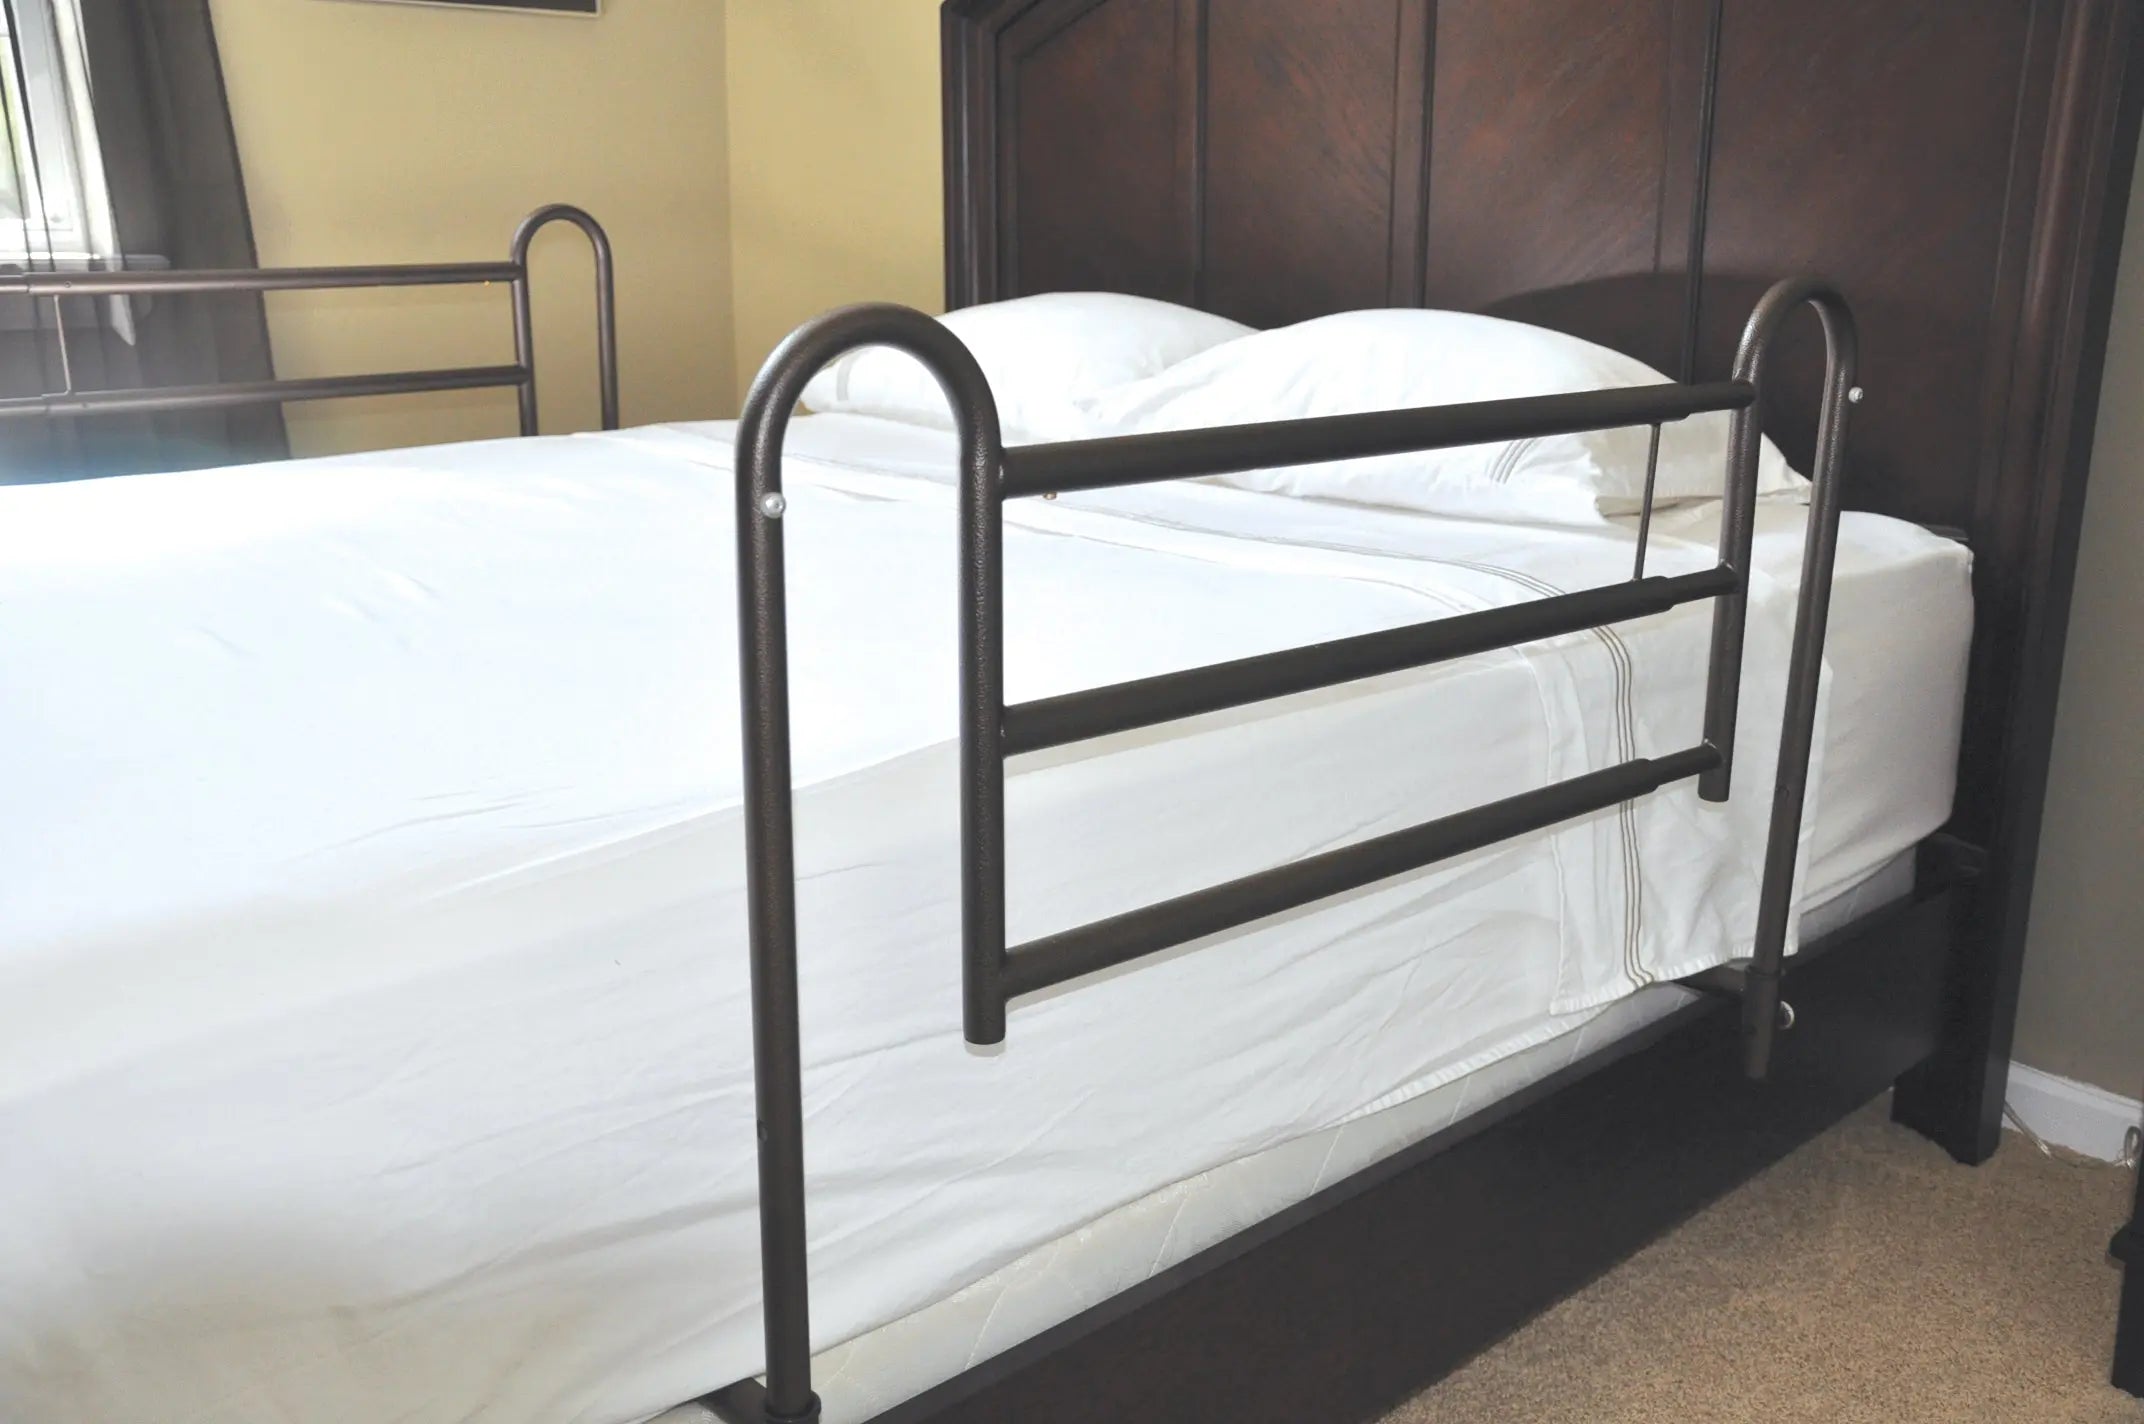 Home Bed Style Adjustable Length Bed Rails - Home Health Store Inc